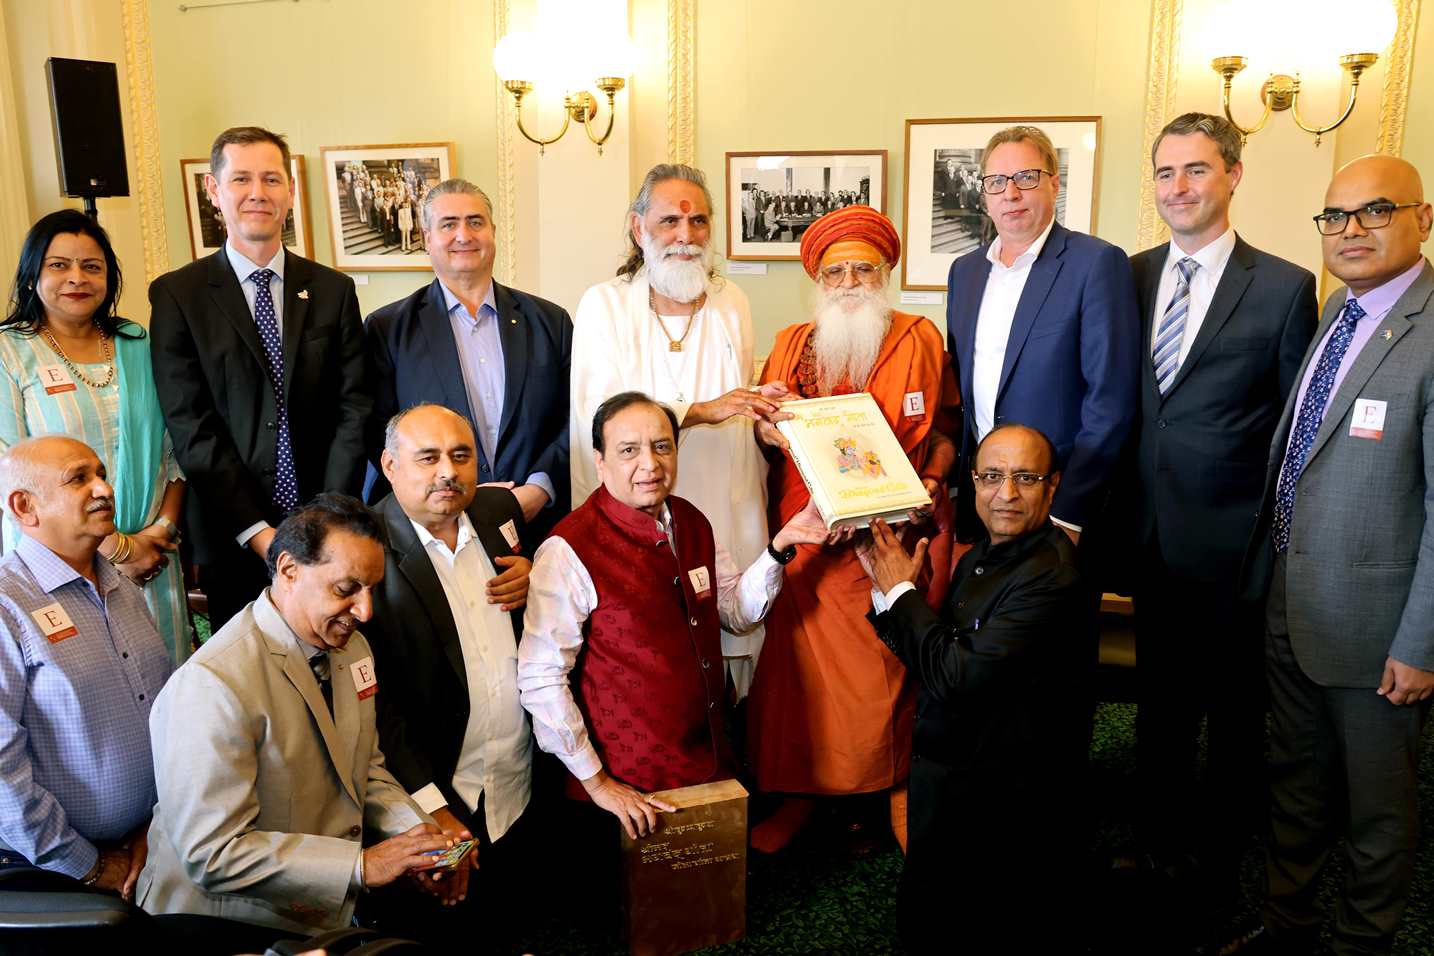 Hon’ble Deputy Speaker of Province of Victoria, Australia received Srimad Bhagavad Gita for display in Parliament.